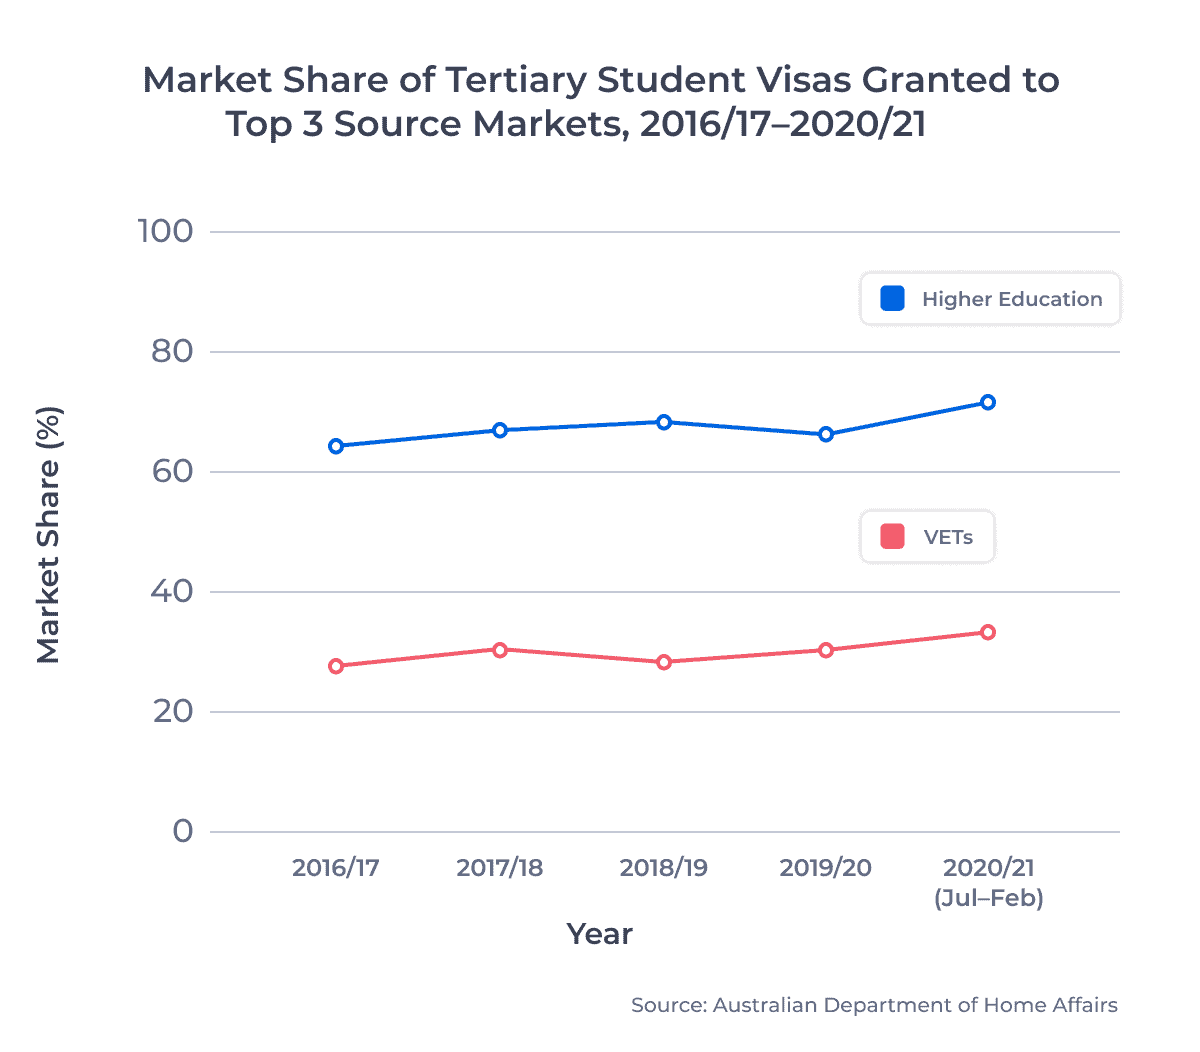 Market Share of Tertiary Education Visas Issued, Top 3 Source Markets, 2016/17-2020/21 (horizontal line graph)